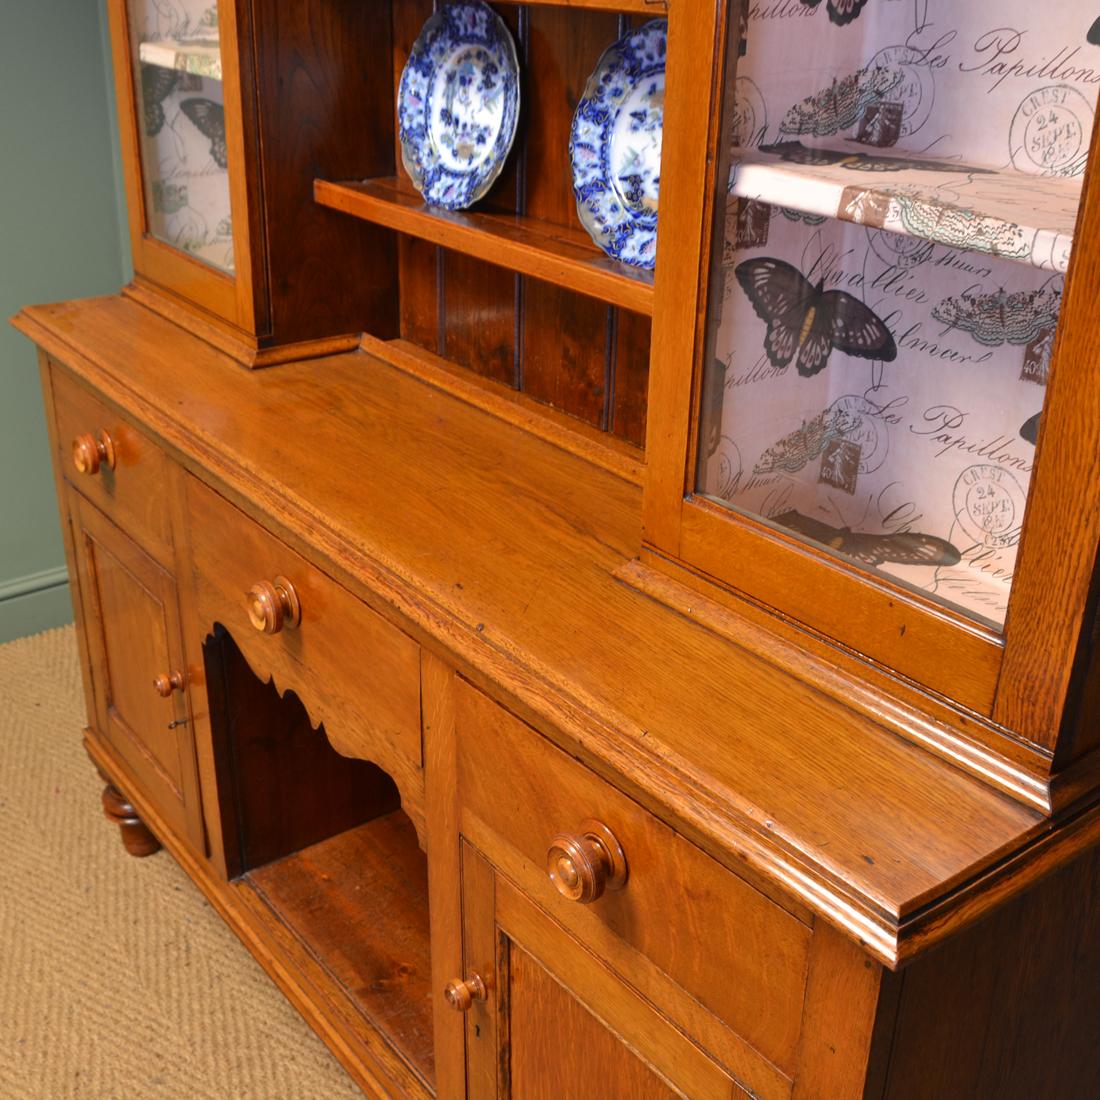 Victorian Welsh oak antique dresser
Dating from circa 1860, this charming Welsh oak dresser has an inverted break front moulded cornice above two glazed cupboards and three central plate racks with hooks. The lower section has a beautifully figured